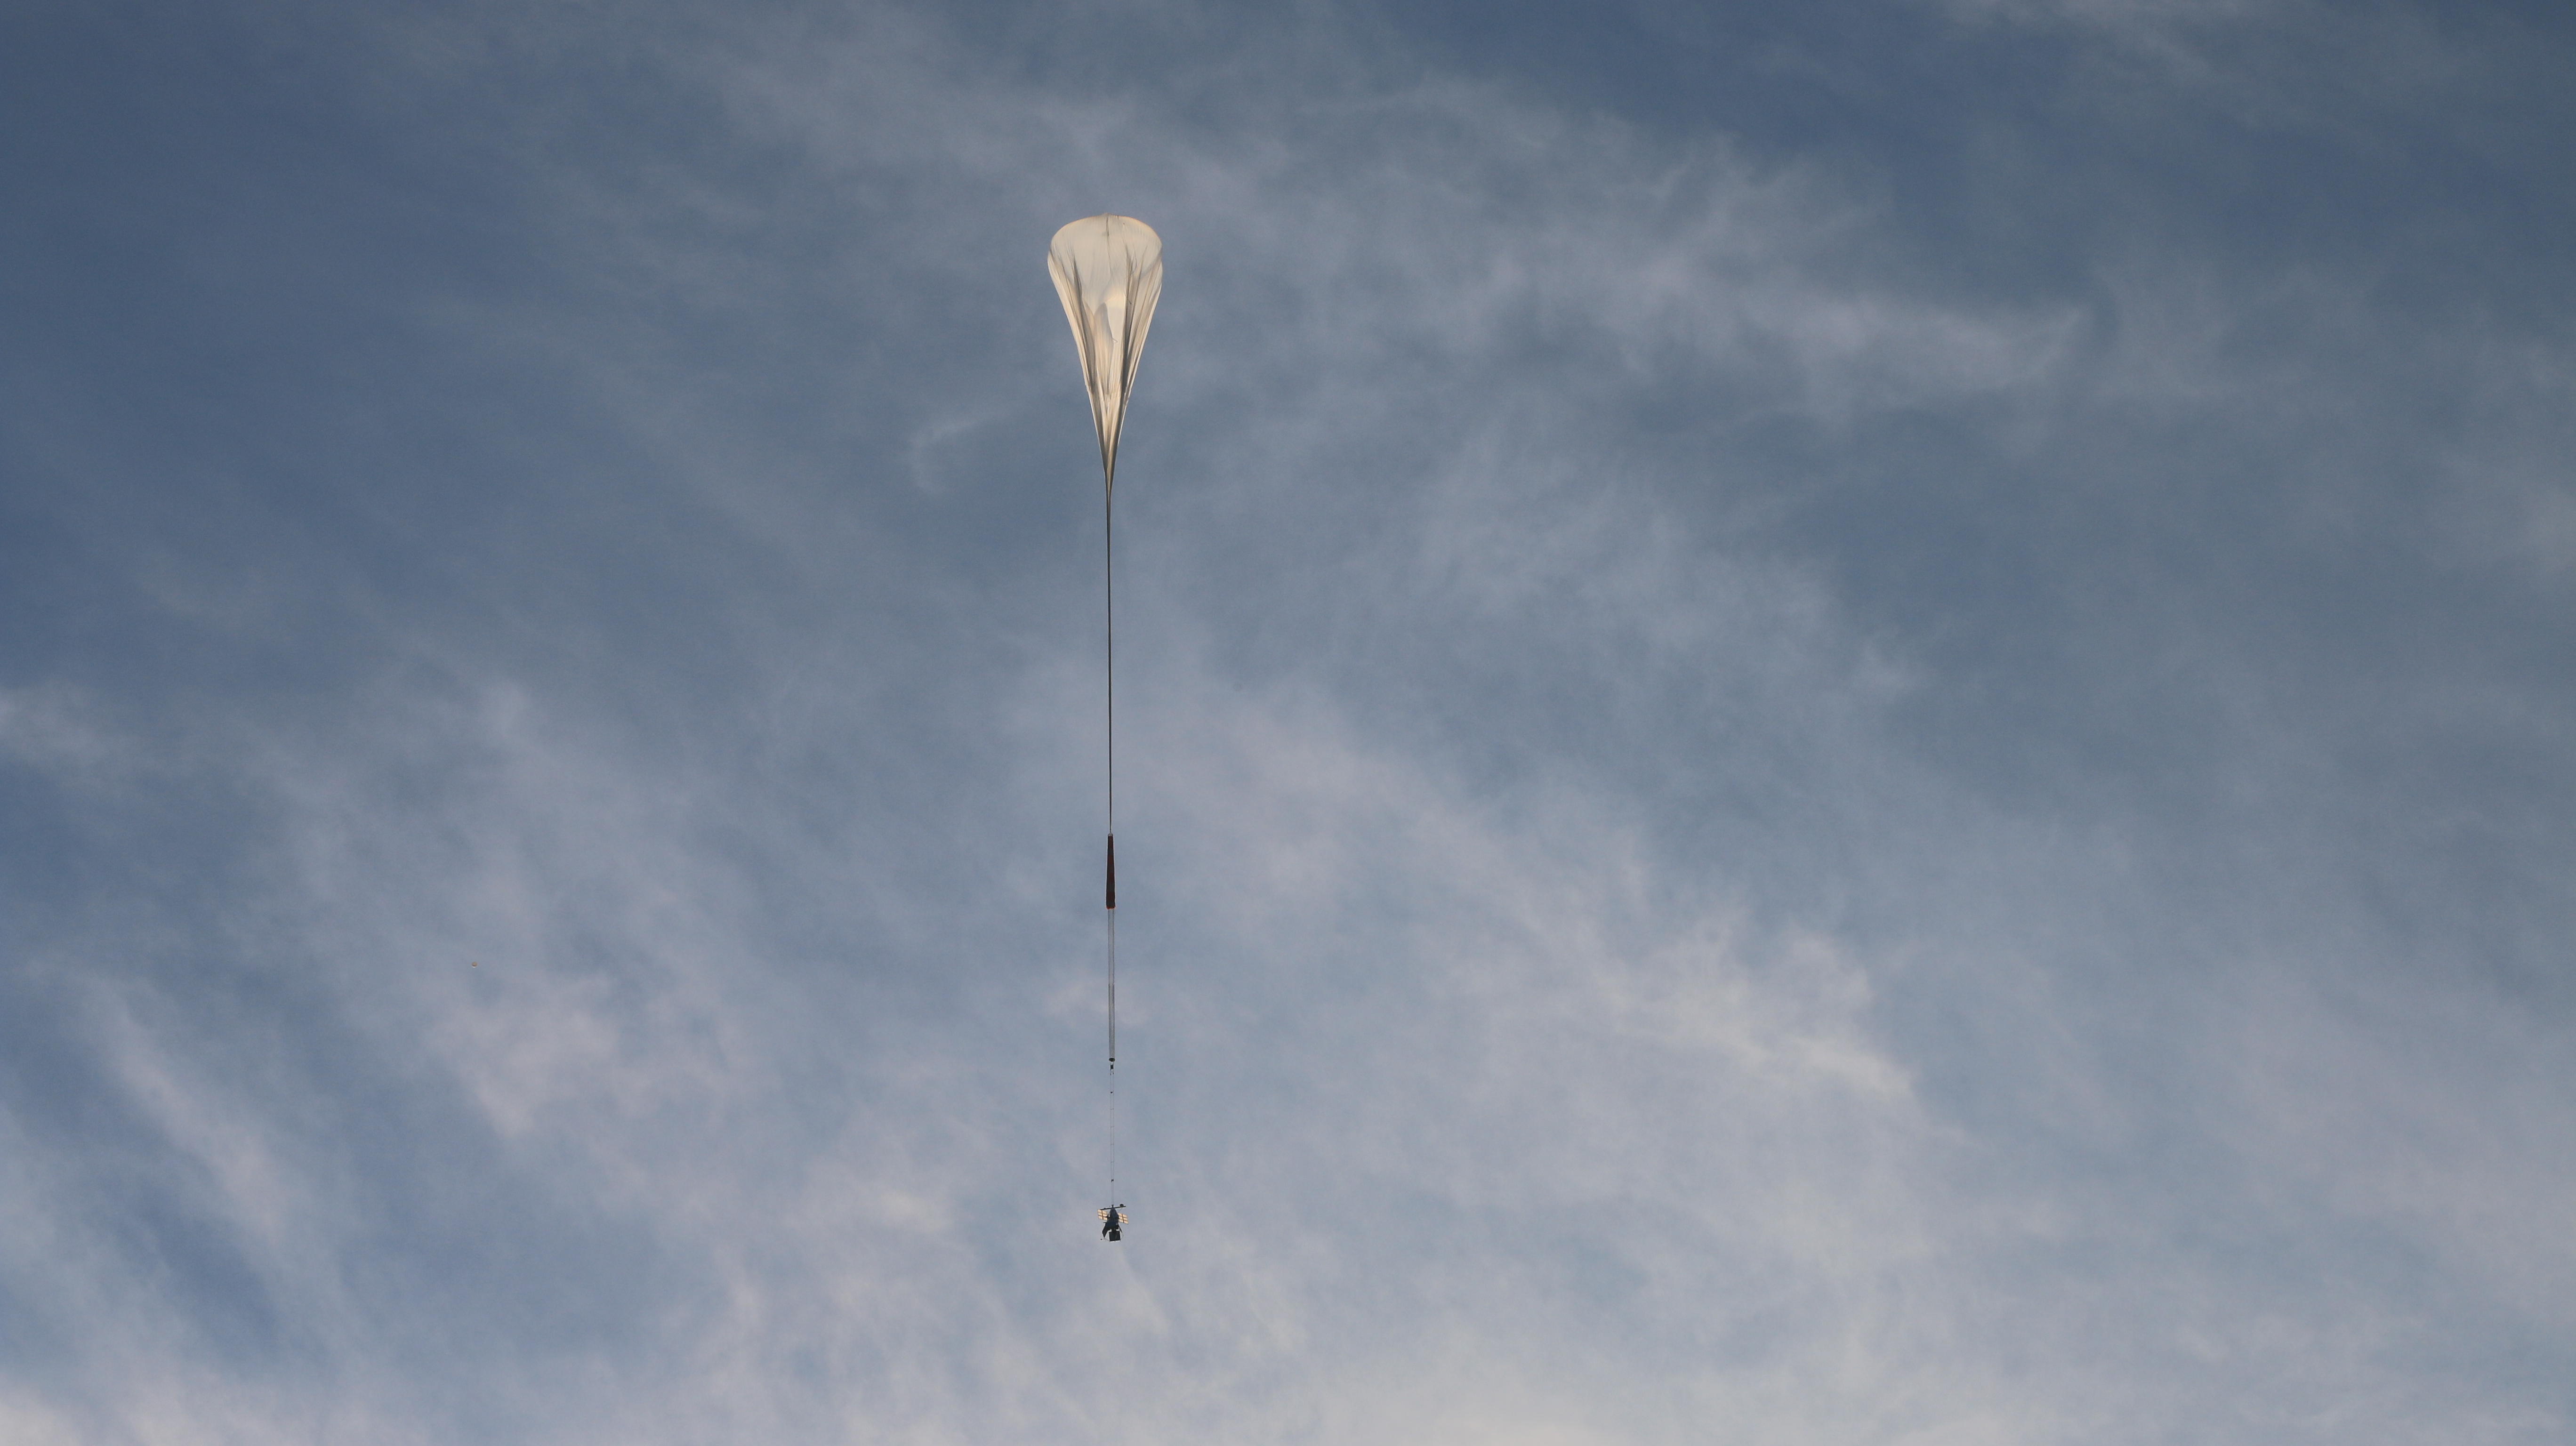 balloon flying in the sky with a long line below it. behind are clouds and a blue sky